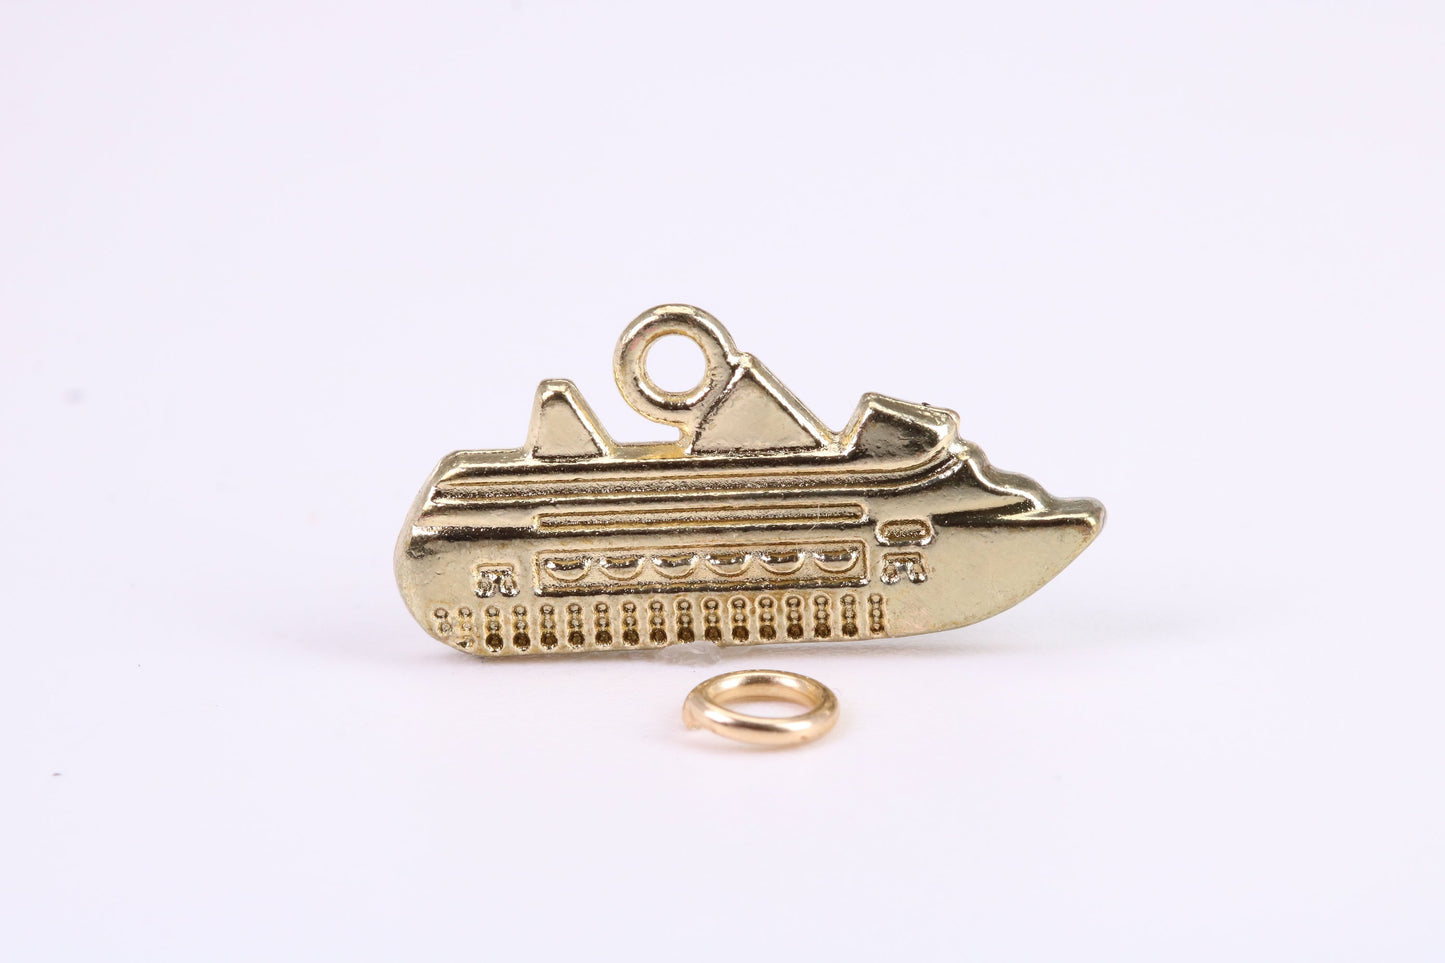 Cruise Ship Charm, Traditional Charm, Made from Solid Yellow Gold, British Hallmarked, Complete with Attachment Link